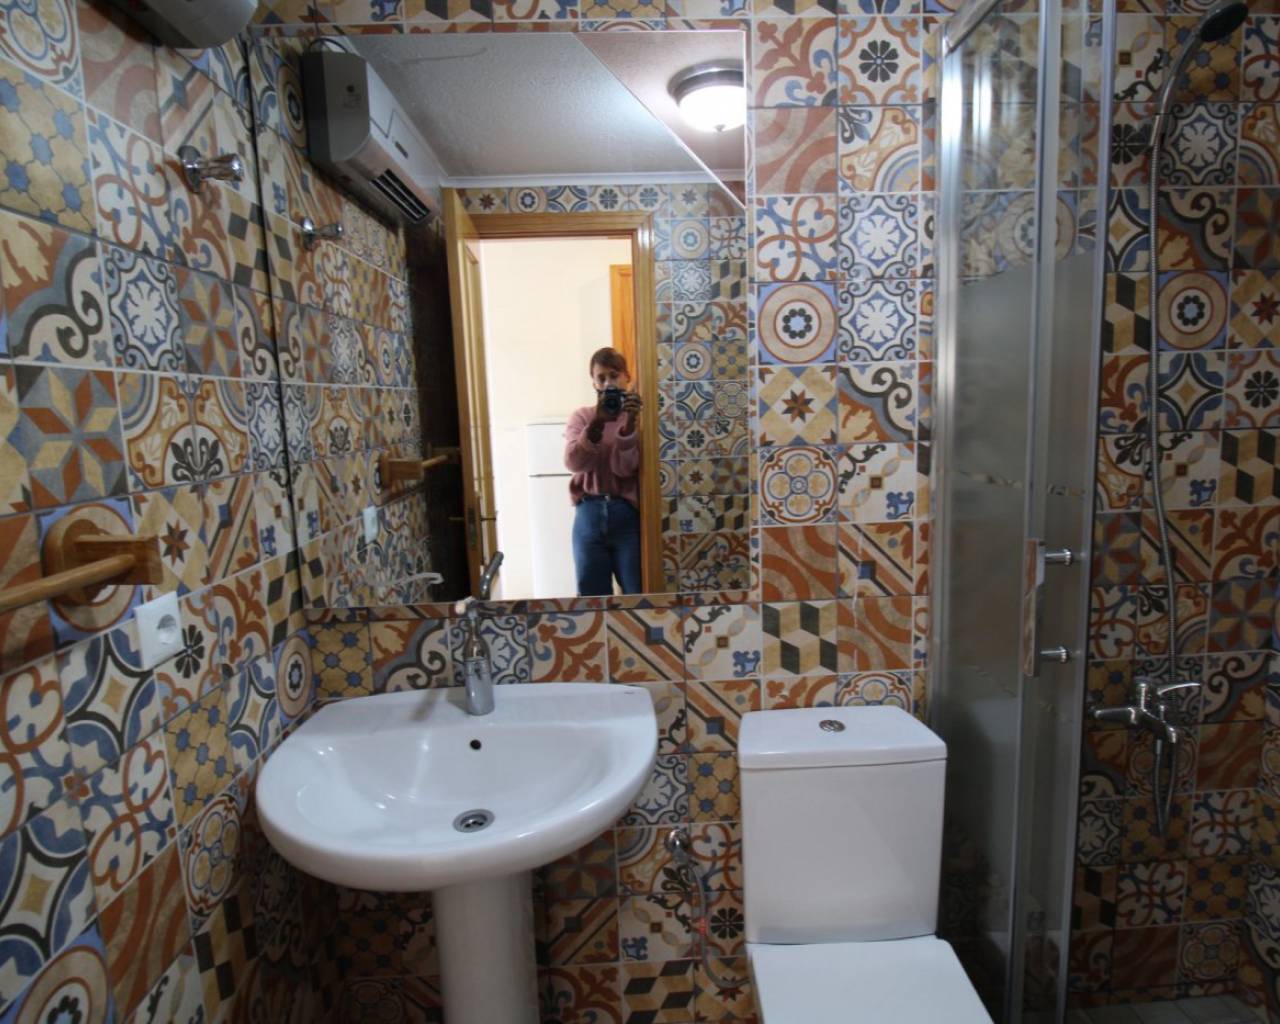 Sale - Terraced house - Torrevieja - Doña ines